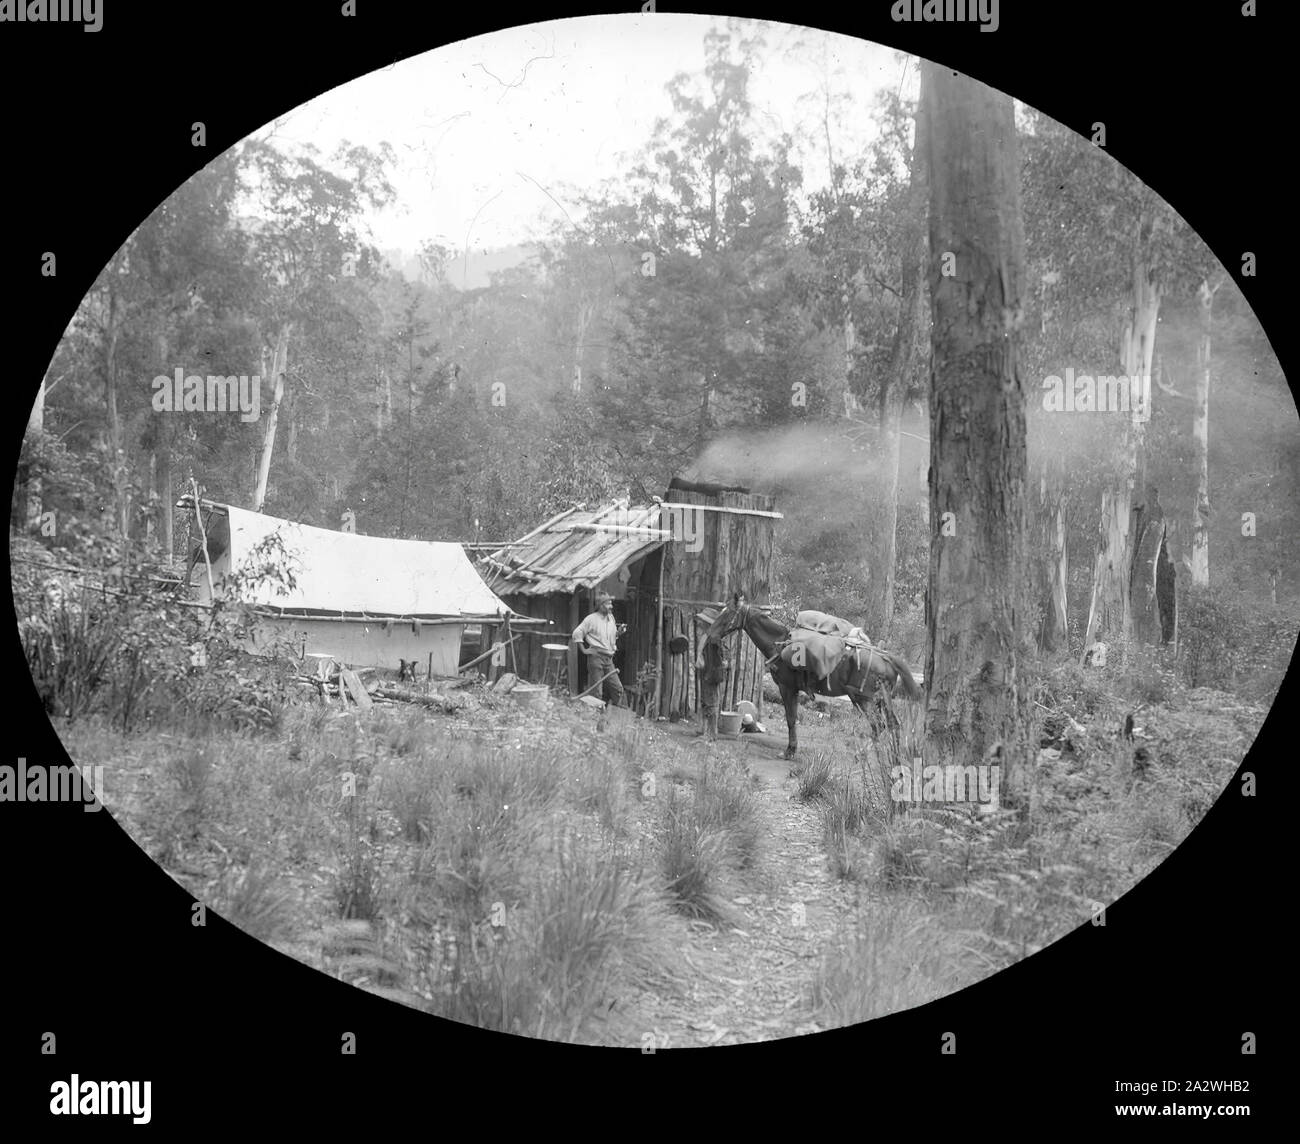 Lantern Slide - Bush Dwelling, Upper Yarra, Victoria, 1904-1907, Black and white image of a simple bush dwelling on the Upper Yarra Track in the high country of Victoria, photographed by A.J. Campbell. Campbell undertook two treks along the Upper Yarra Track, one in 1904 and the other in 1907, this image would have been taken on one of them Stock Photo